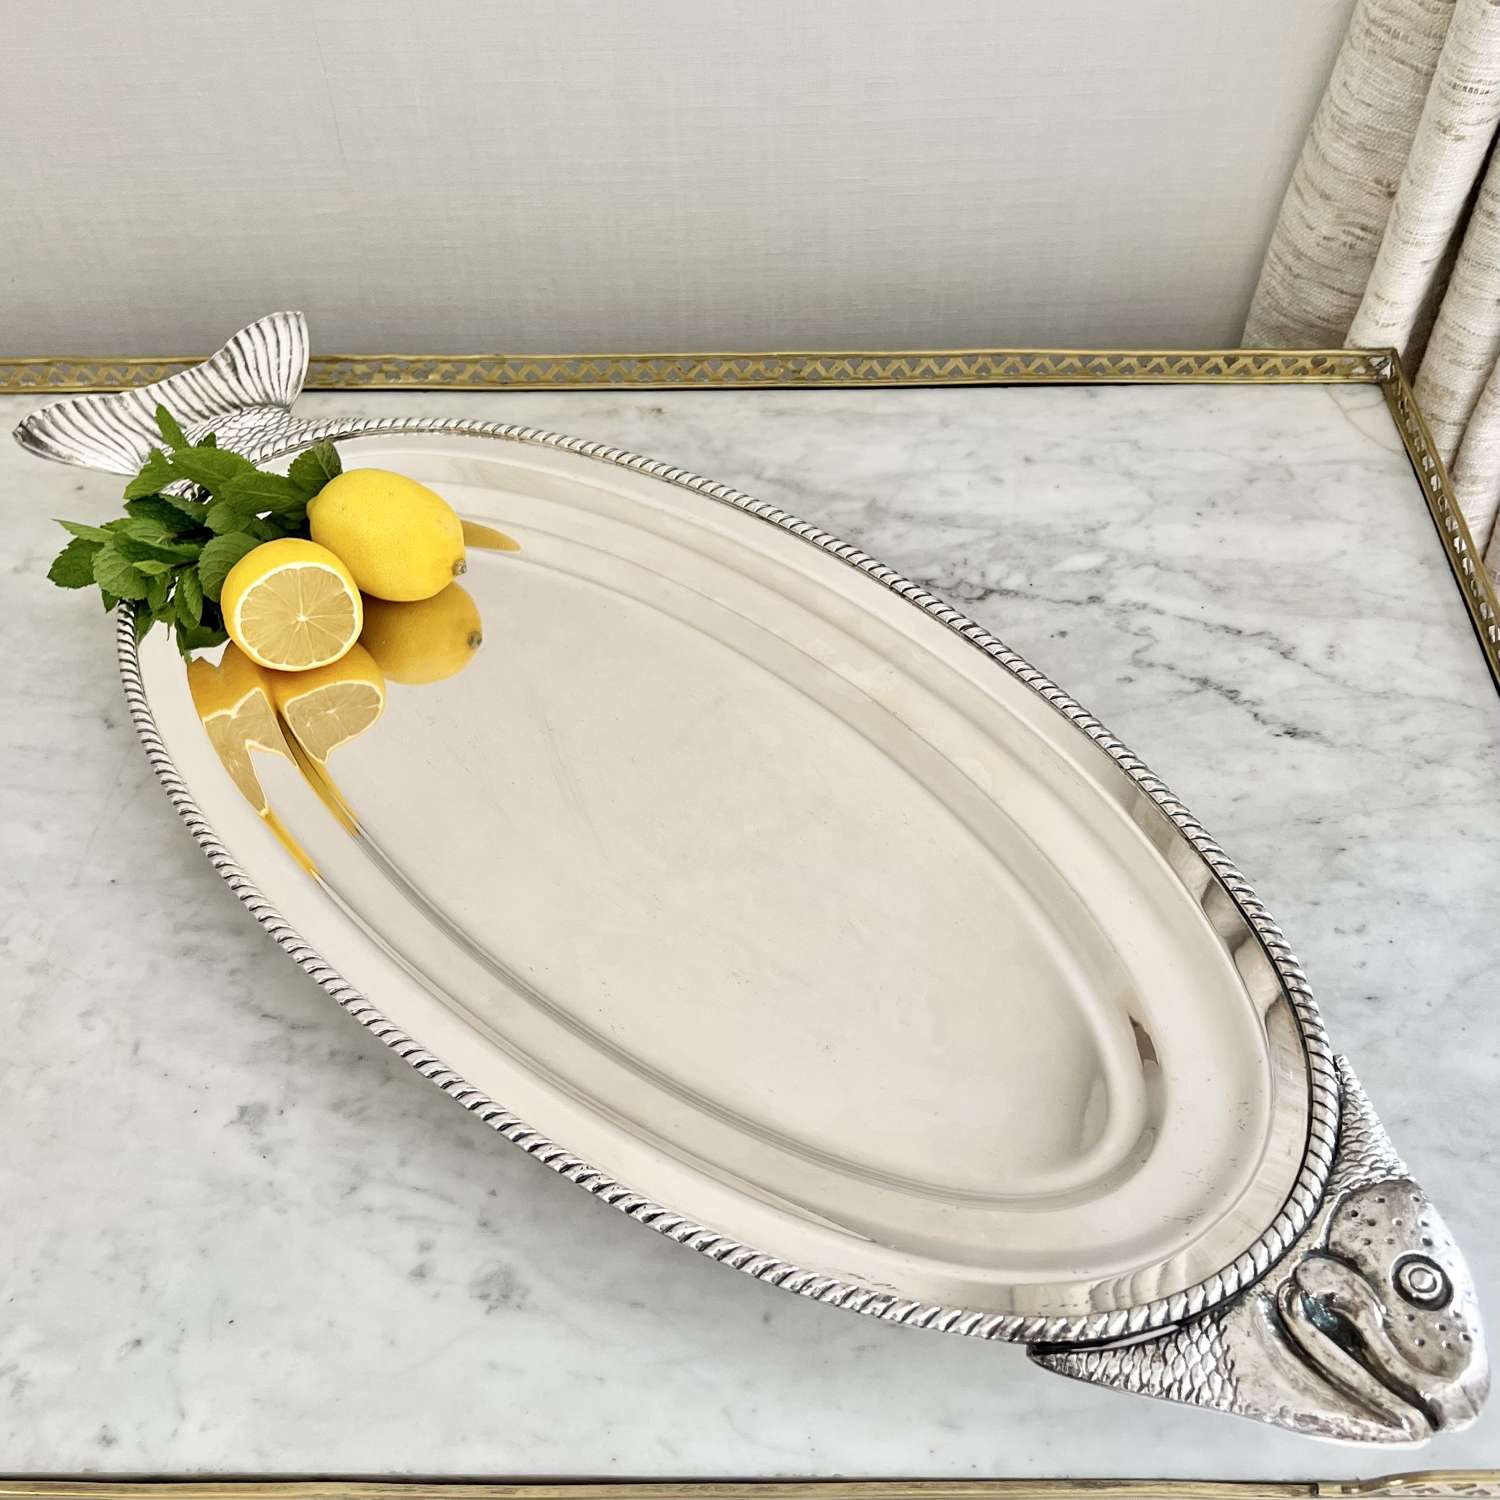 Heavy gauge silver plated fish serving platter